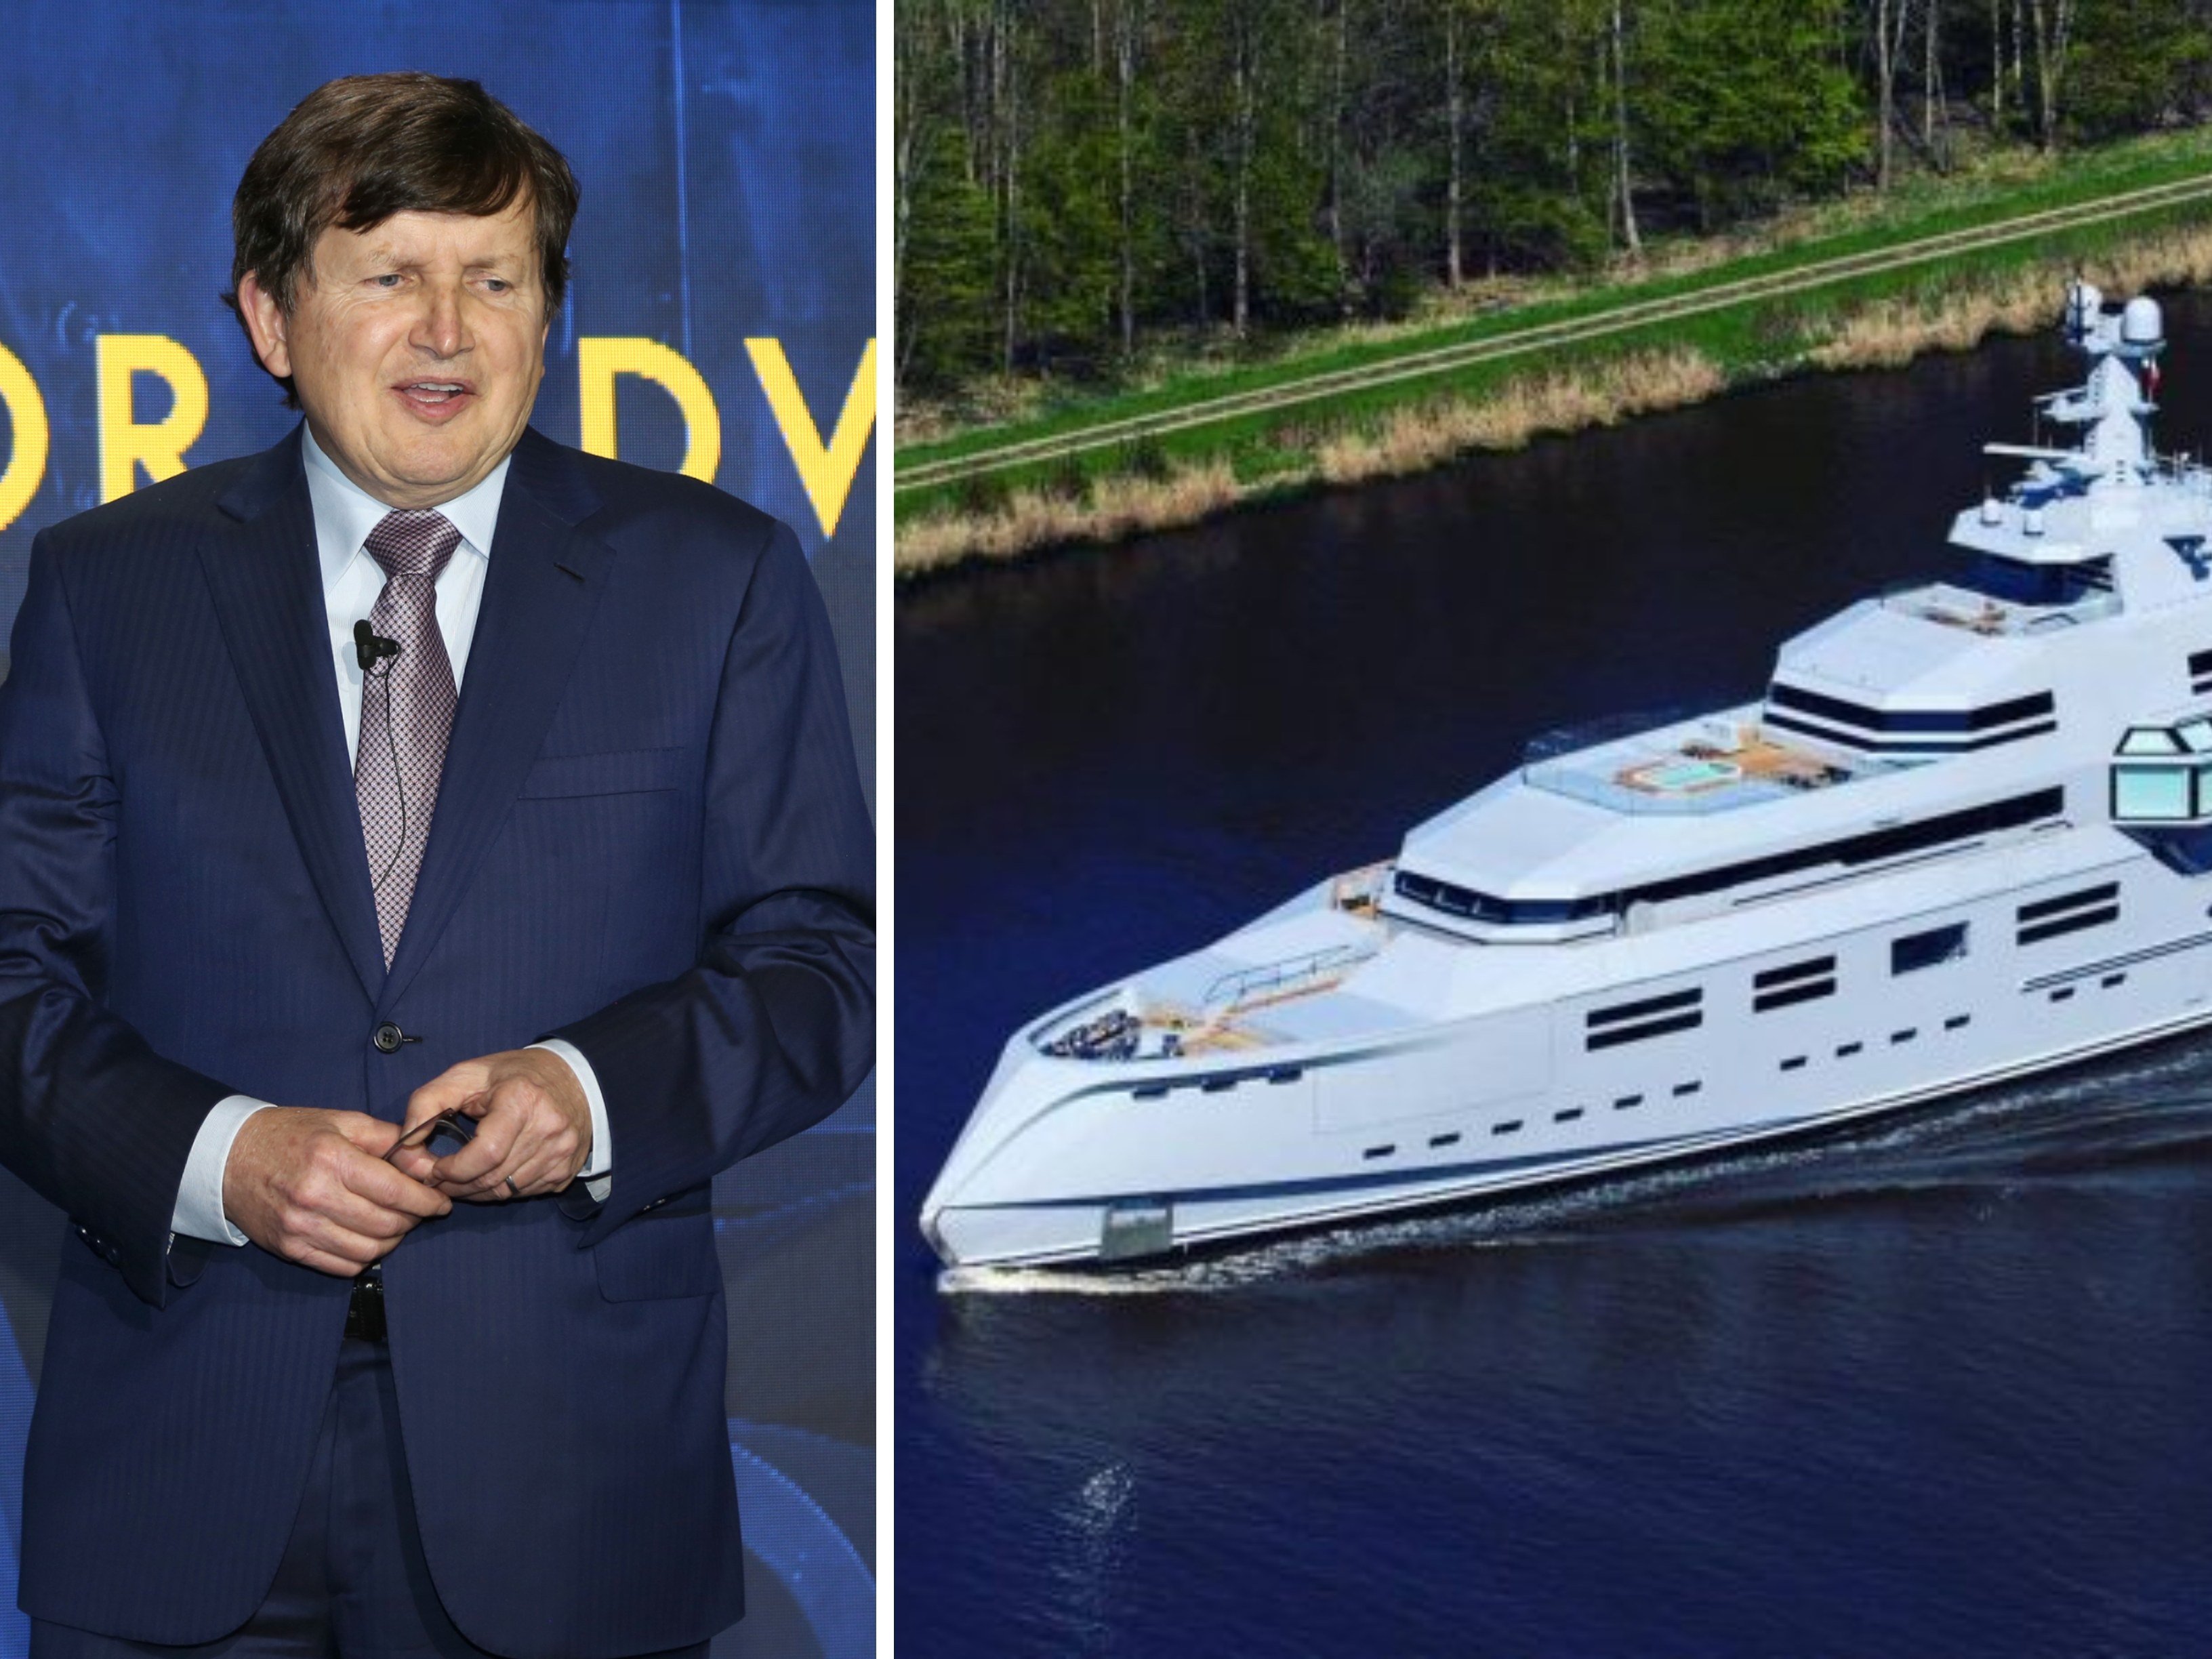 Former Microsoft software developer Charles Simonyi has a new megayacht, Norn. Photos: Getty Images, Handout